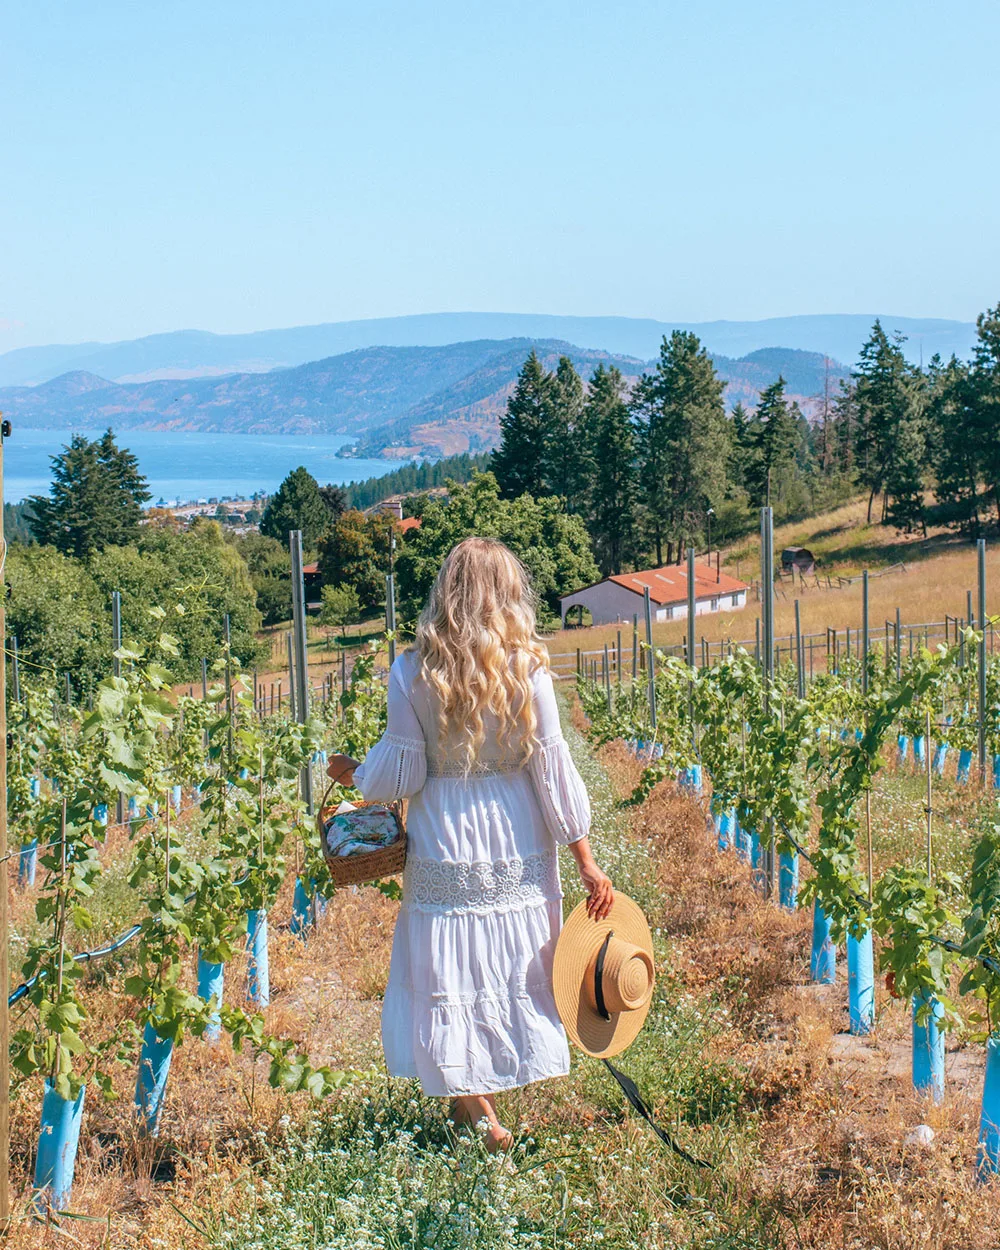 If you're heading to the Okanagan soon and planning on spending time in Kelowna, you don't want to miss this guide to the best wineries in Kelowna! From organic wineries to wineries with the best view, this guide will help you plan your visit to Kelowna’s incredible wine region. Pictured here: Black Swift Vineyards